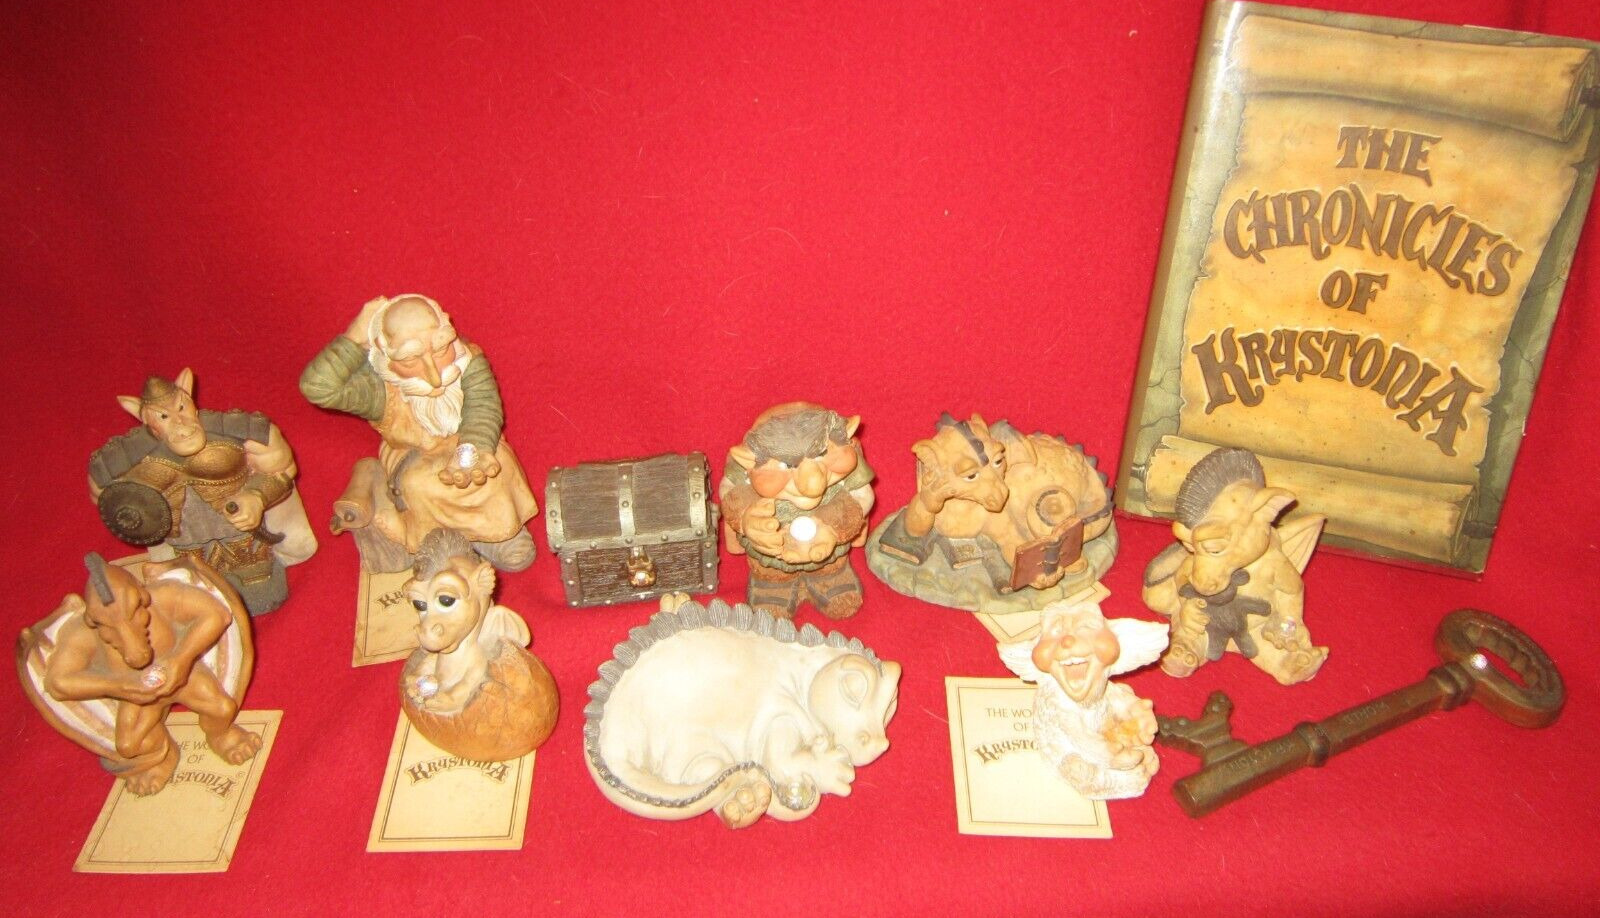 Lot of 11 Vintage Krystonia Figurines + Book - Great Condition